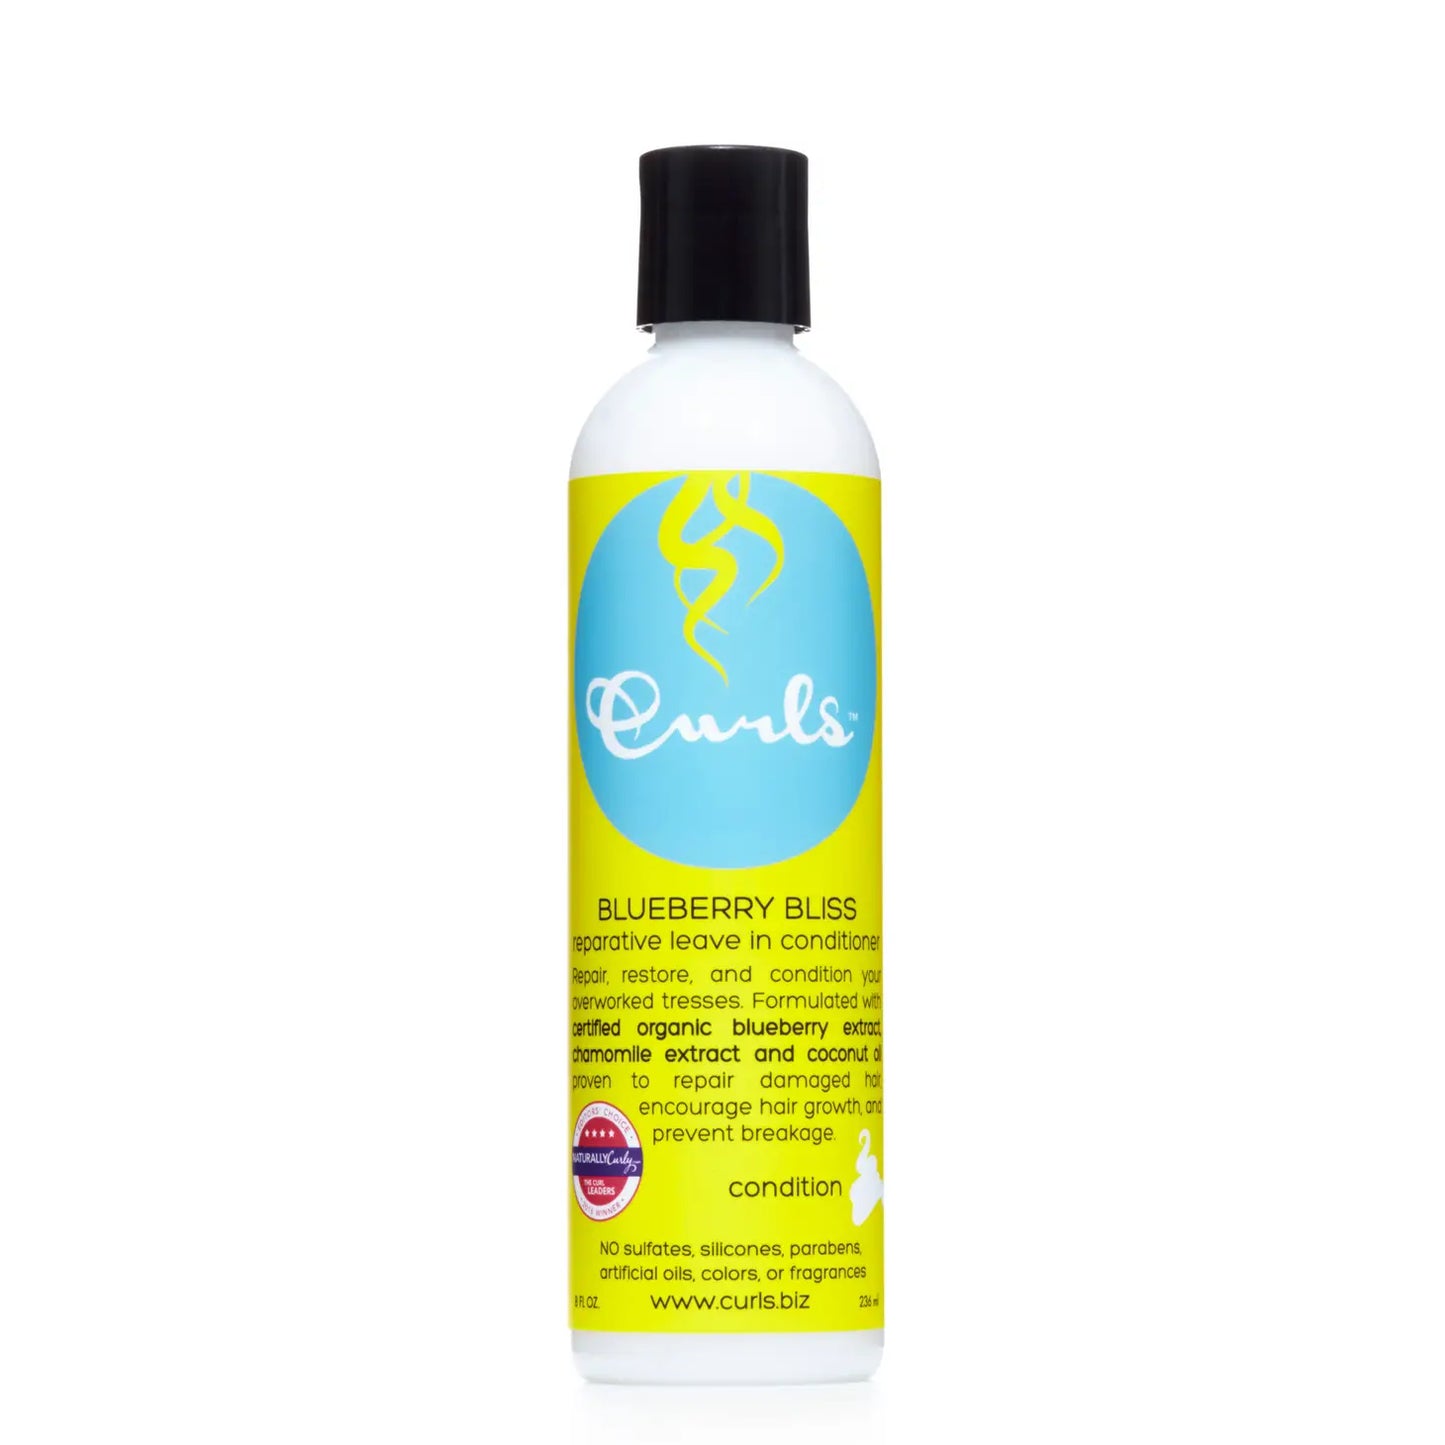 Blueberry Bliss Reparative Leave-In Conditioner